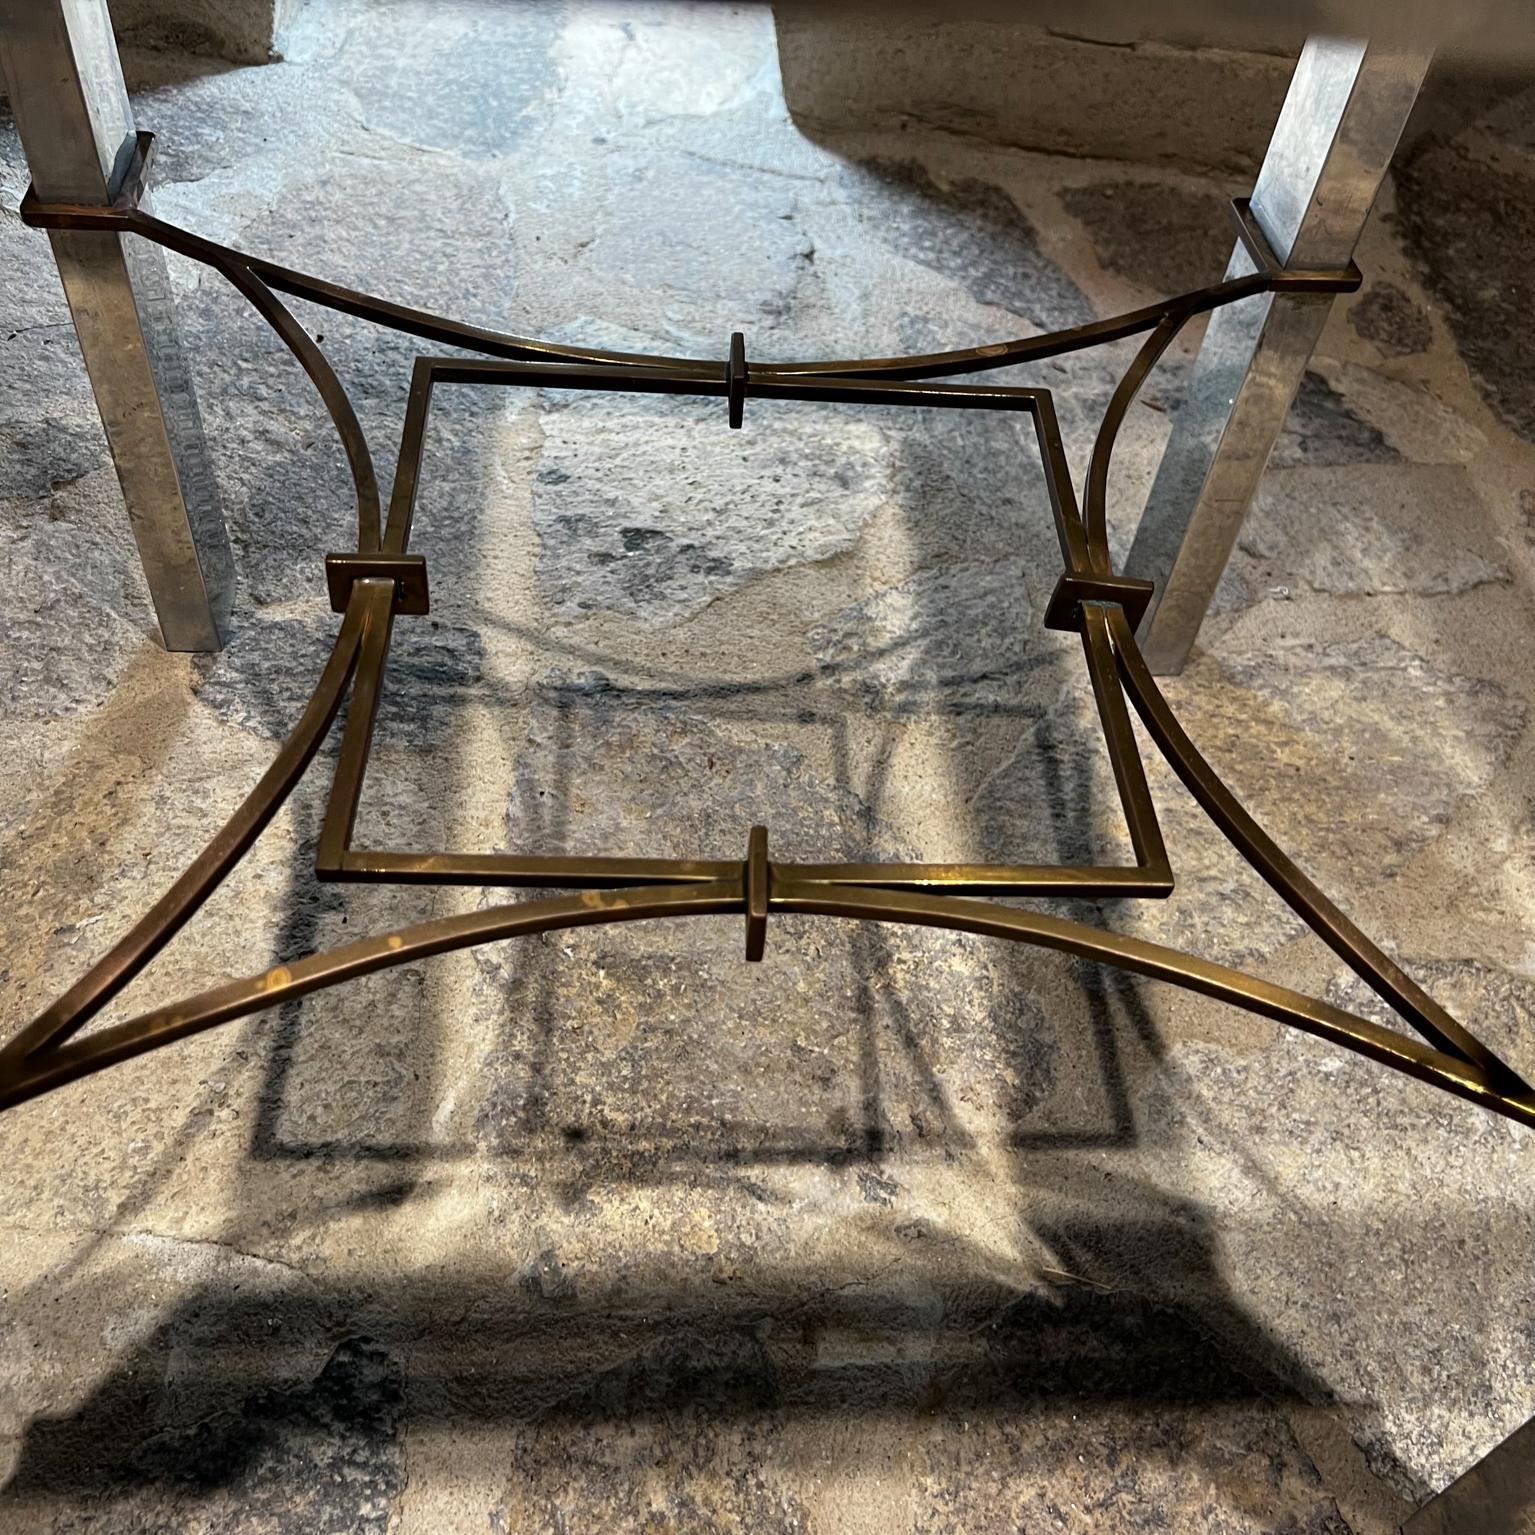 1960s Arturo Pani Modern Side Tables Aluminum and Bronze Mexico City For Sale 6